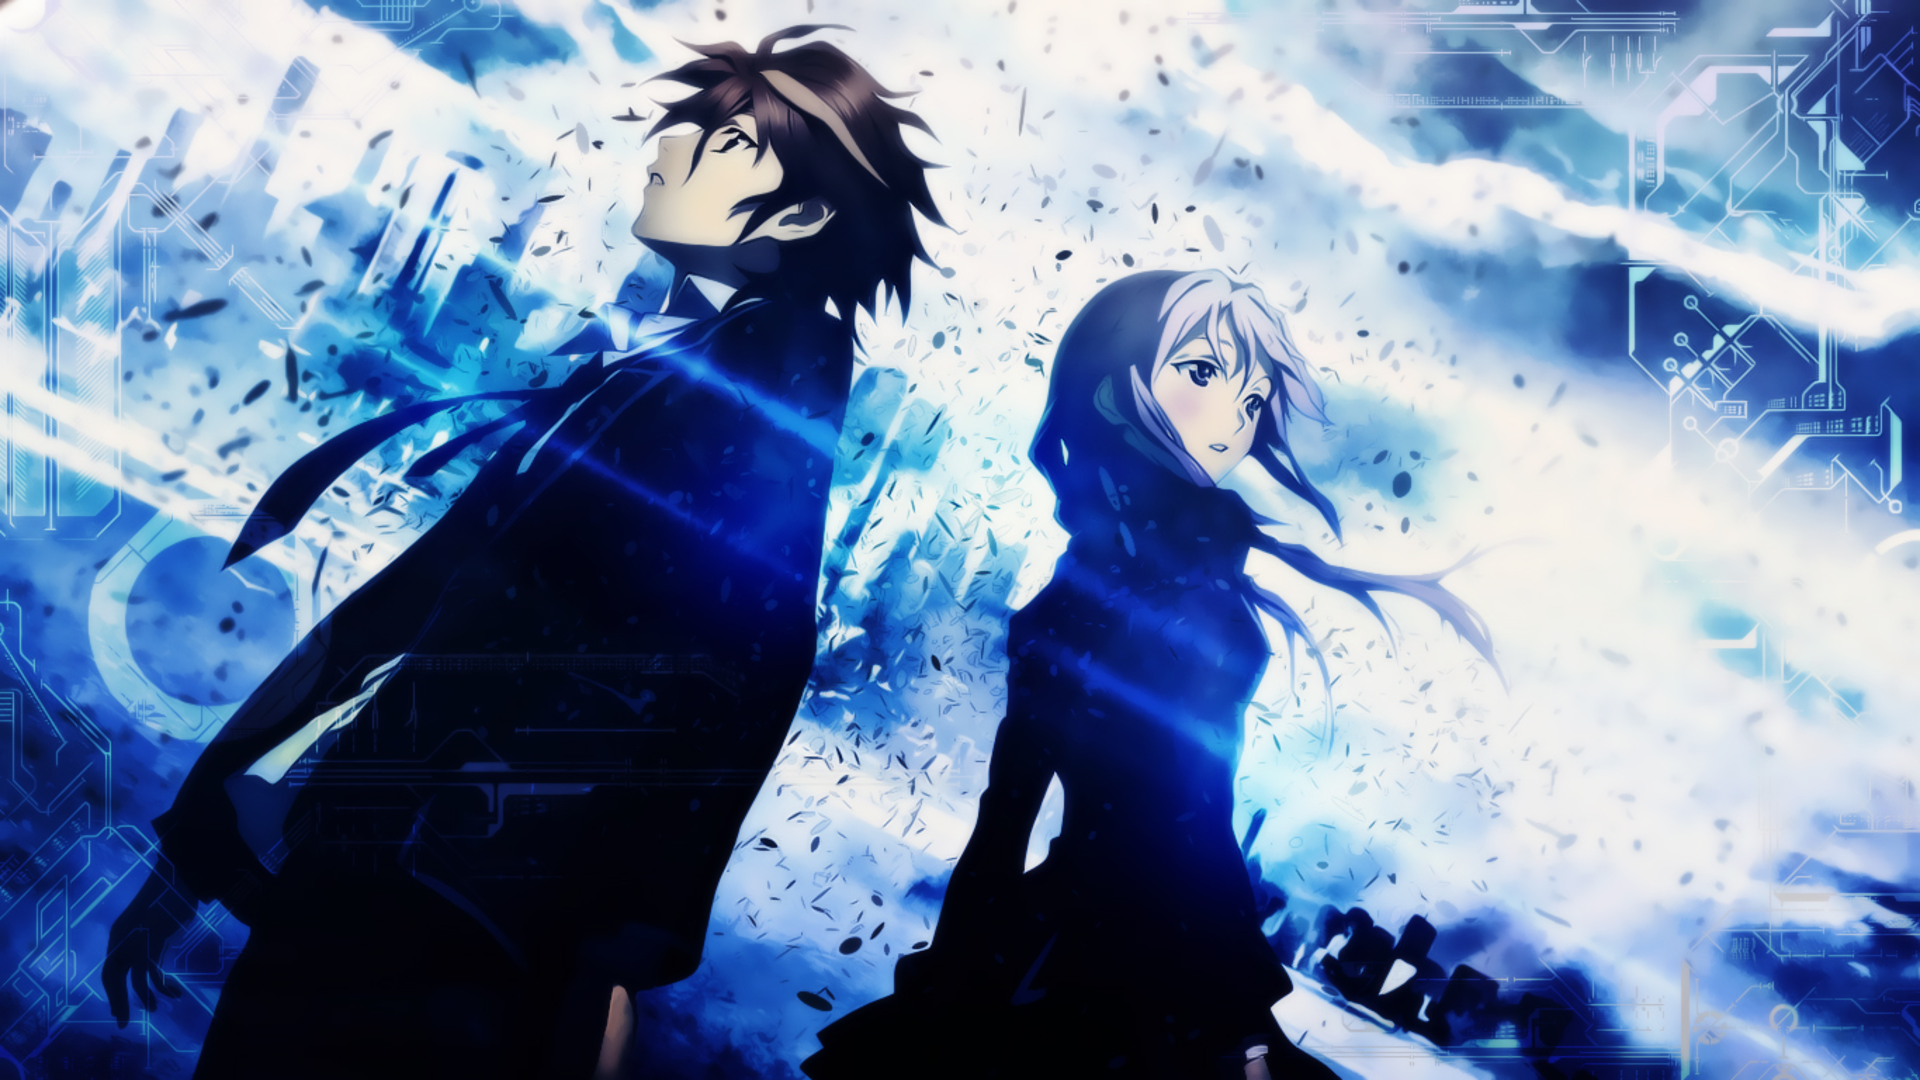 Anime Guilty Crown HD Wallpaper by HatsOff-Designs